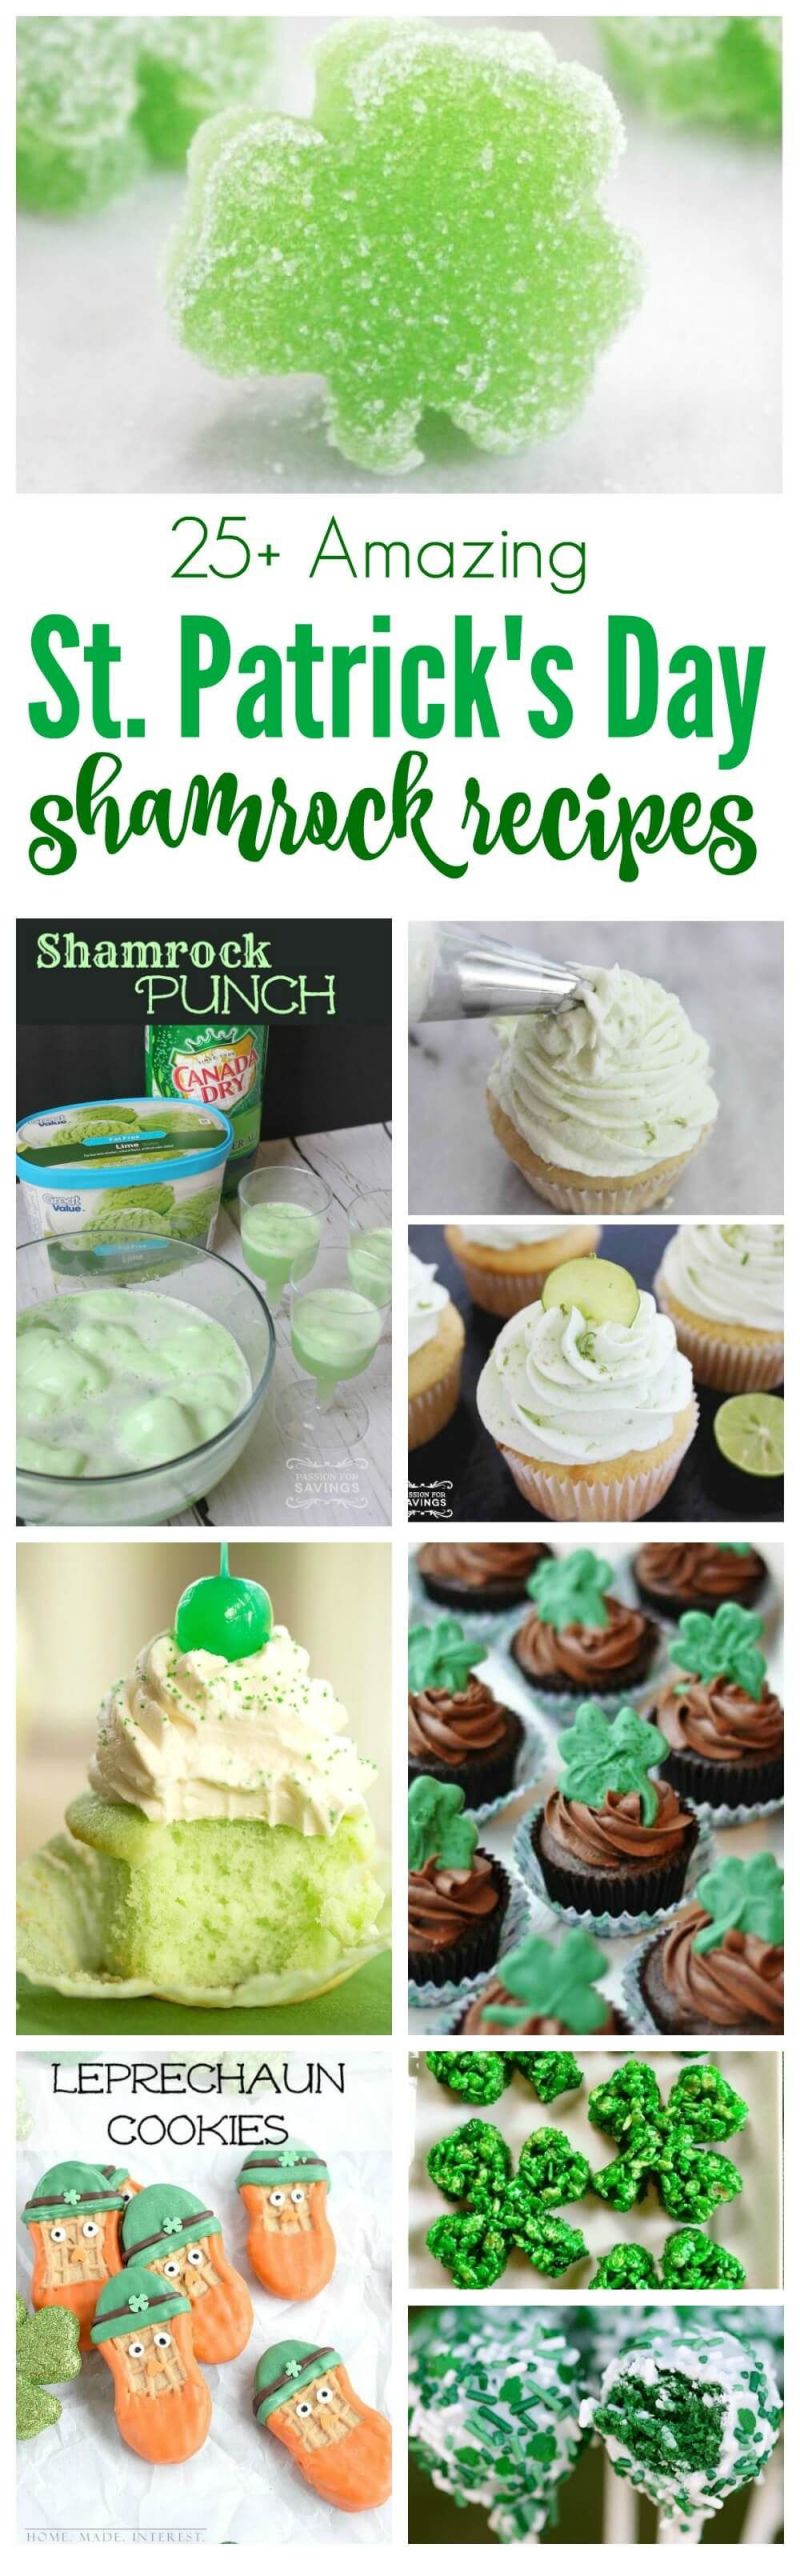 Recipes For St Patrick's Day Party
 St Patricks Day Shamrock Recipes to help you celebrate